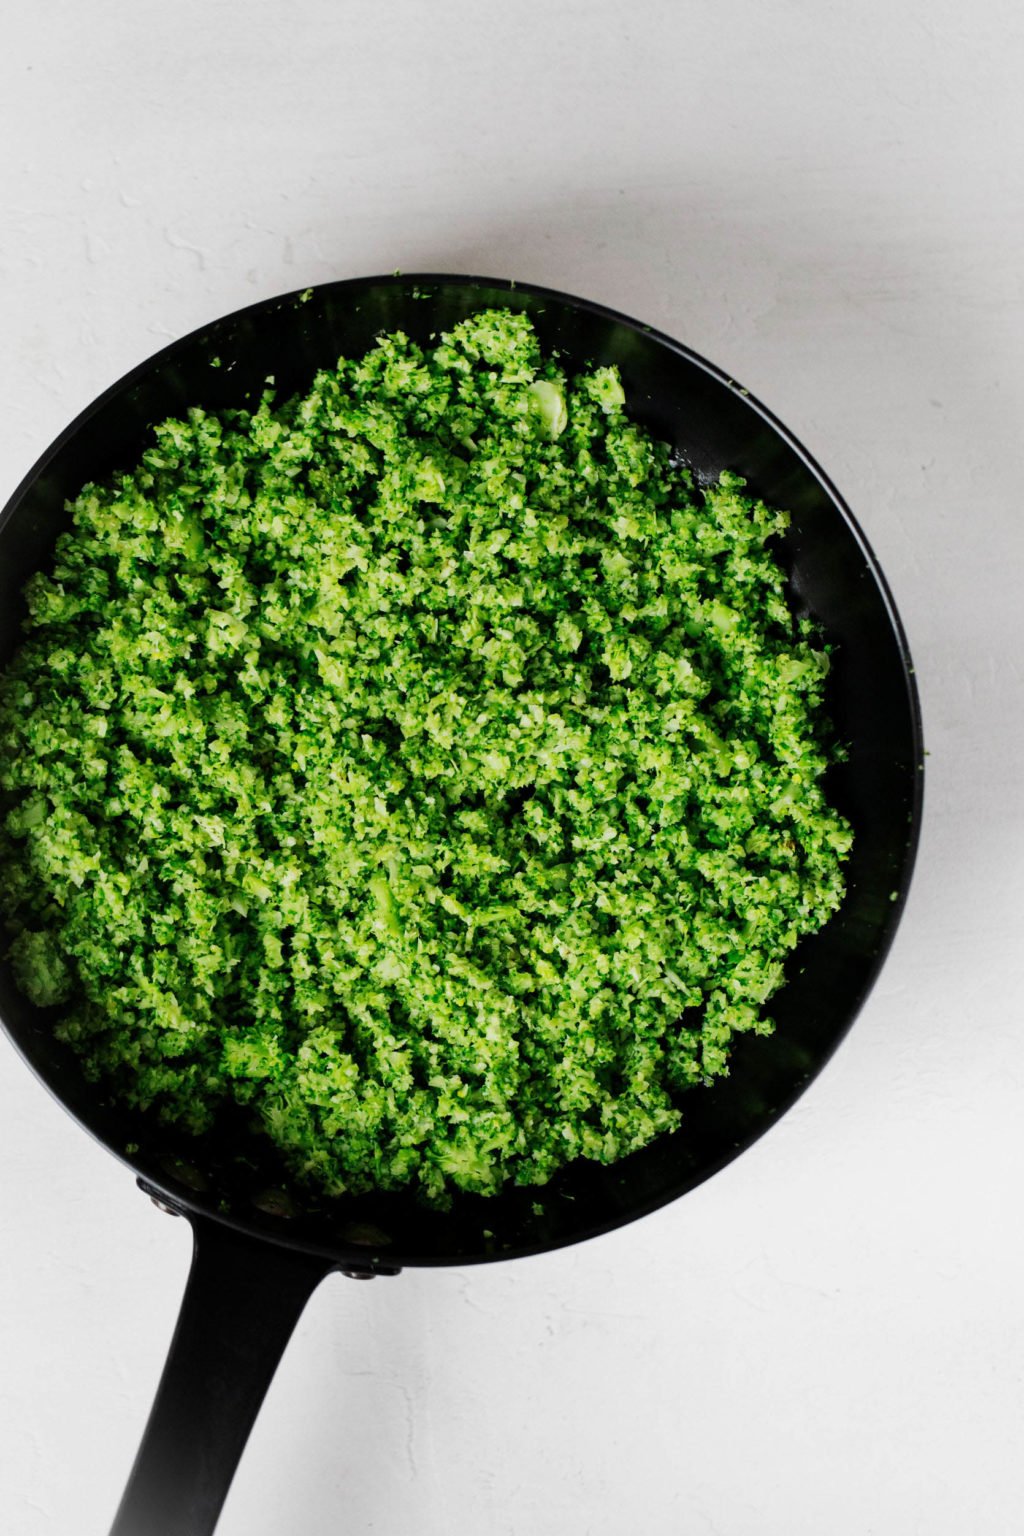 A black, cast iron skillet is full of finely chopped, lightly steamed broccoli.